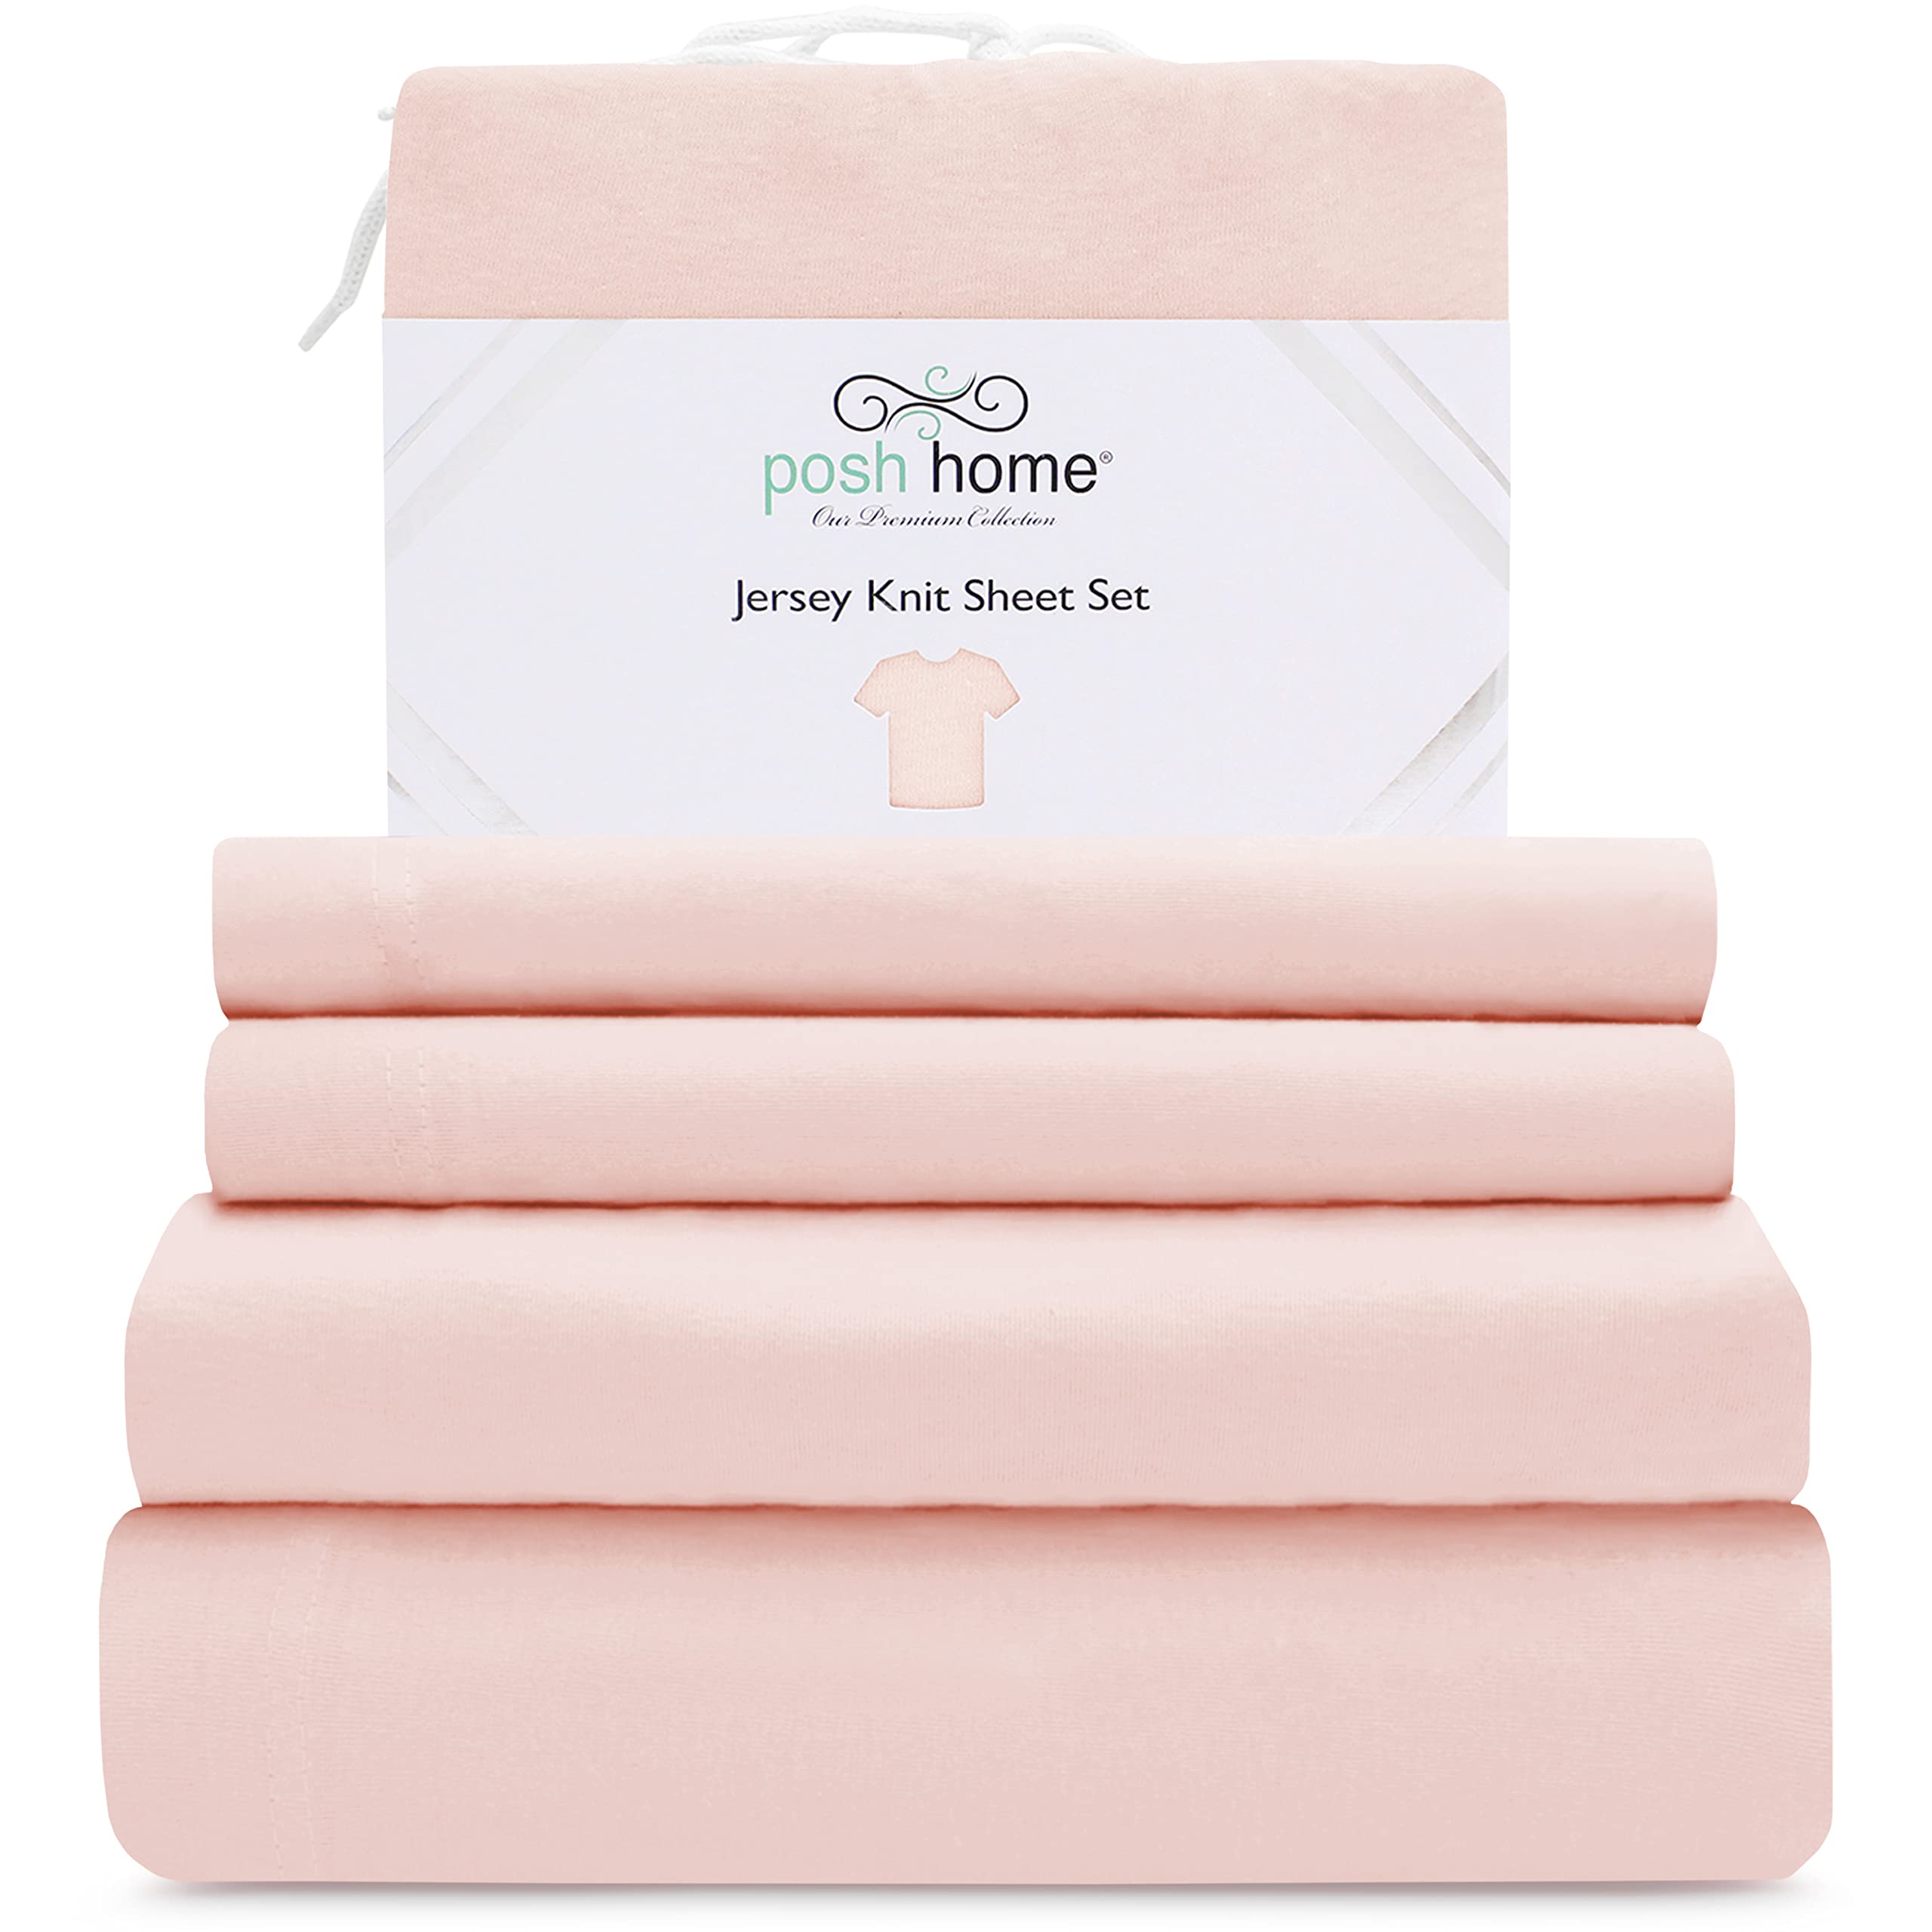 Posh Home Jersey Knit Sheet Set - 4-Piece Jersey Bed Sheets - T-Shirt Breathable Soft Cotton Jersey Sheets - Includes Flat Sheet